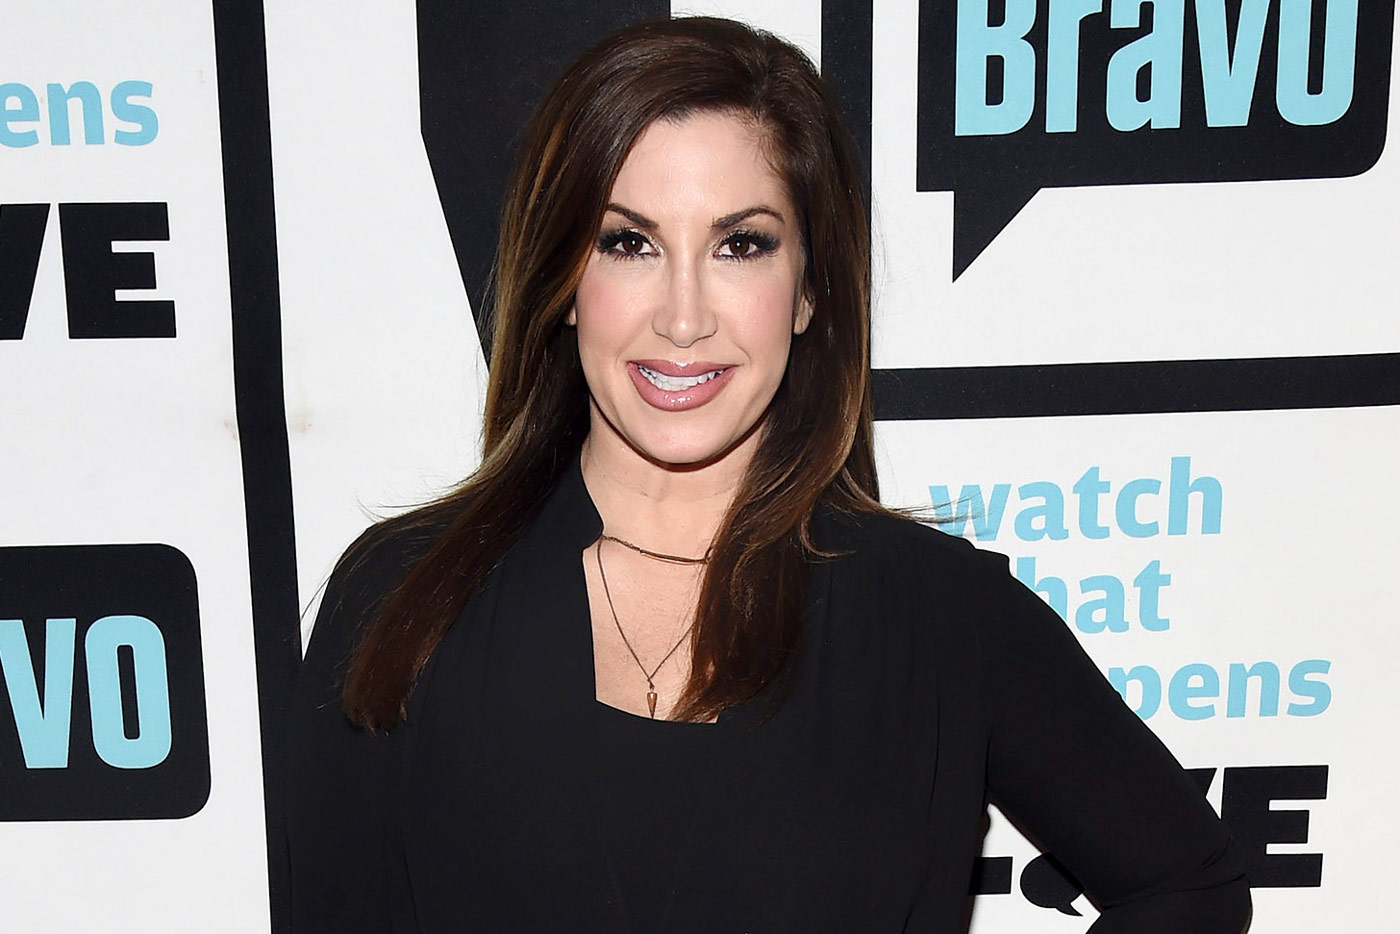 Jacqueline Laurita Shares Husband Chris Laurita Photo on Instagram The Daily Dish hq image